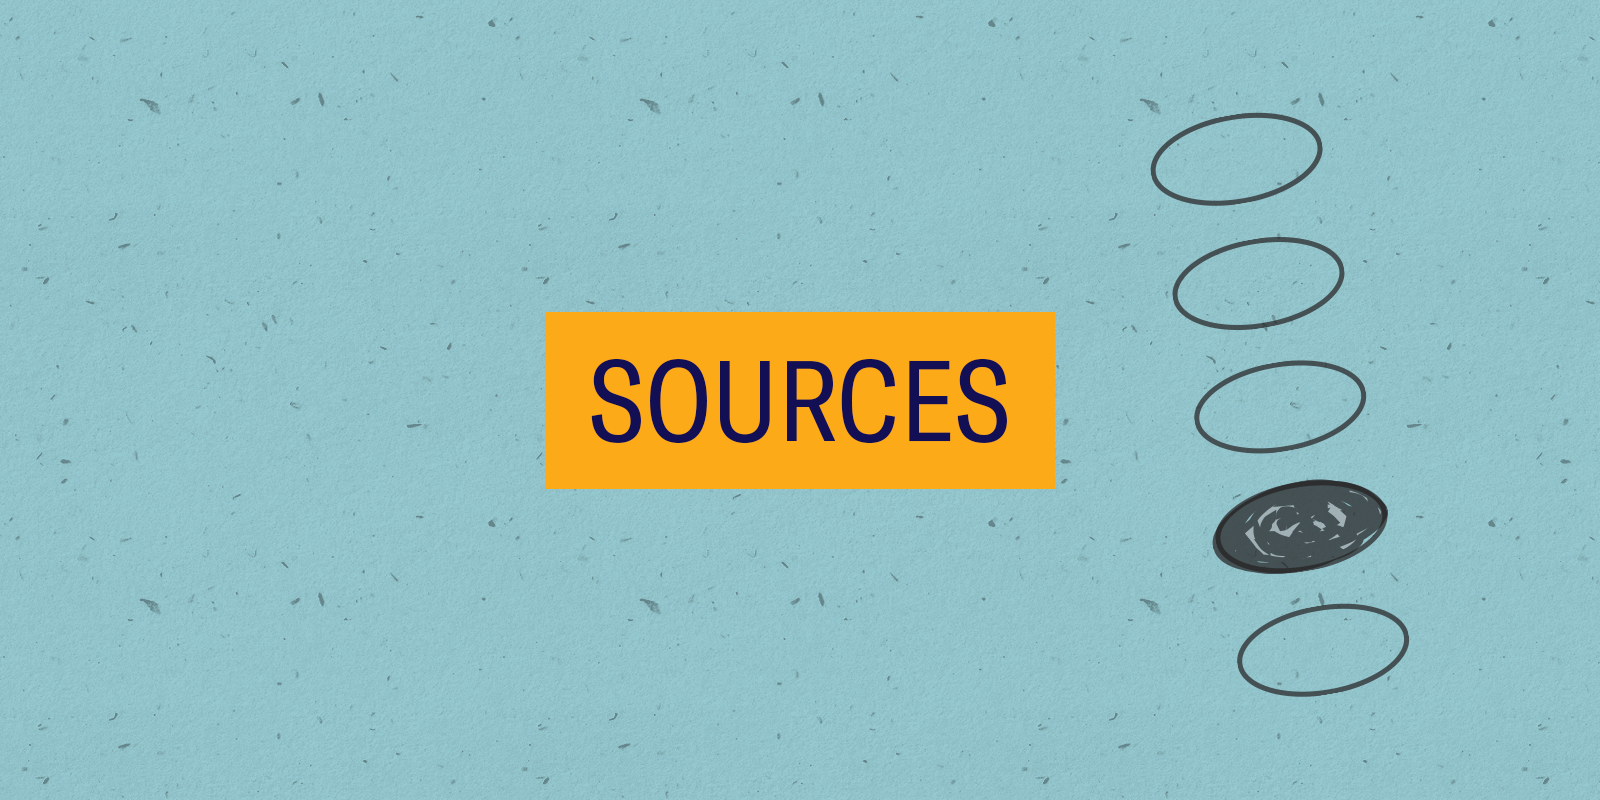 The word 'Sources' in navy font in an orange rectangle on a textured light blue background